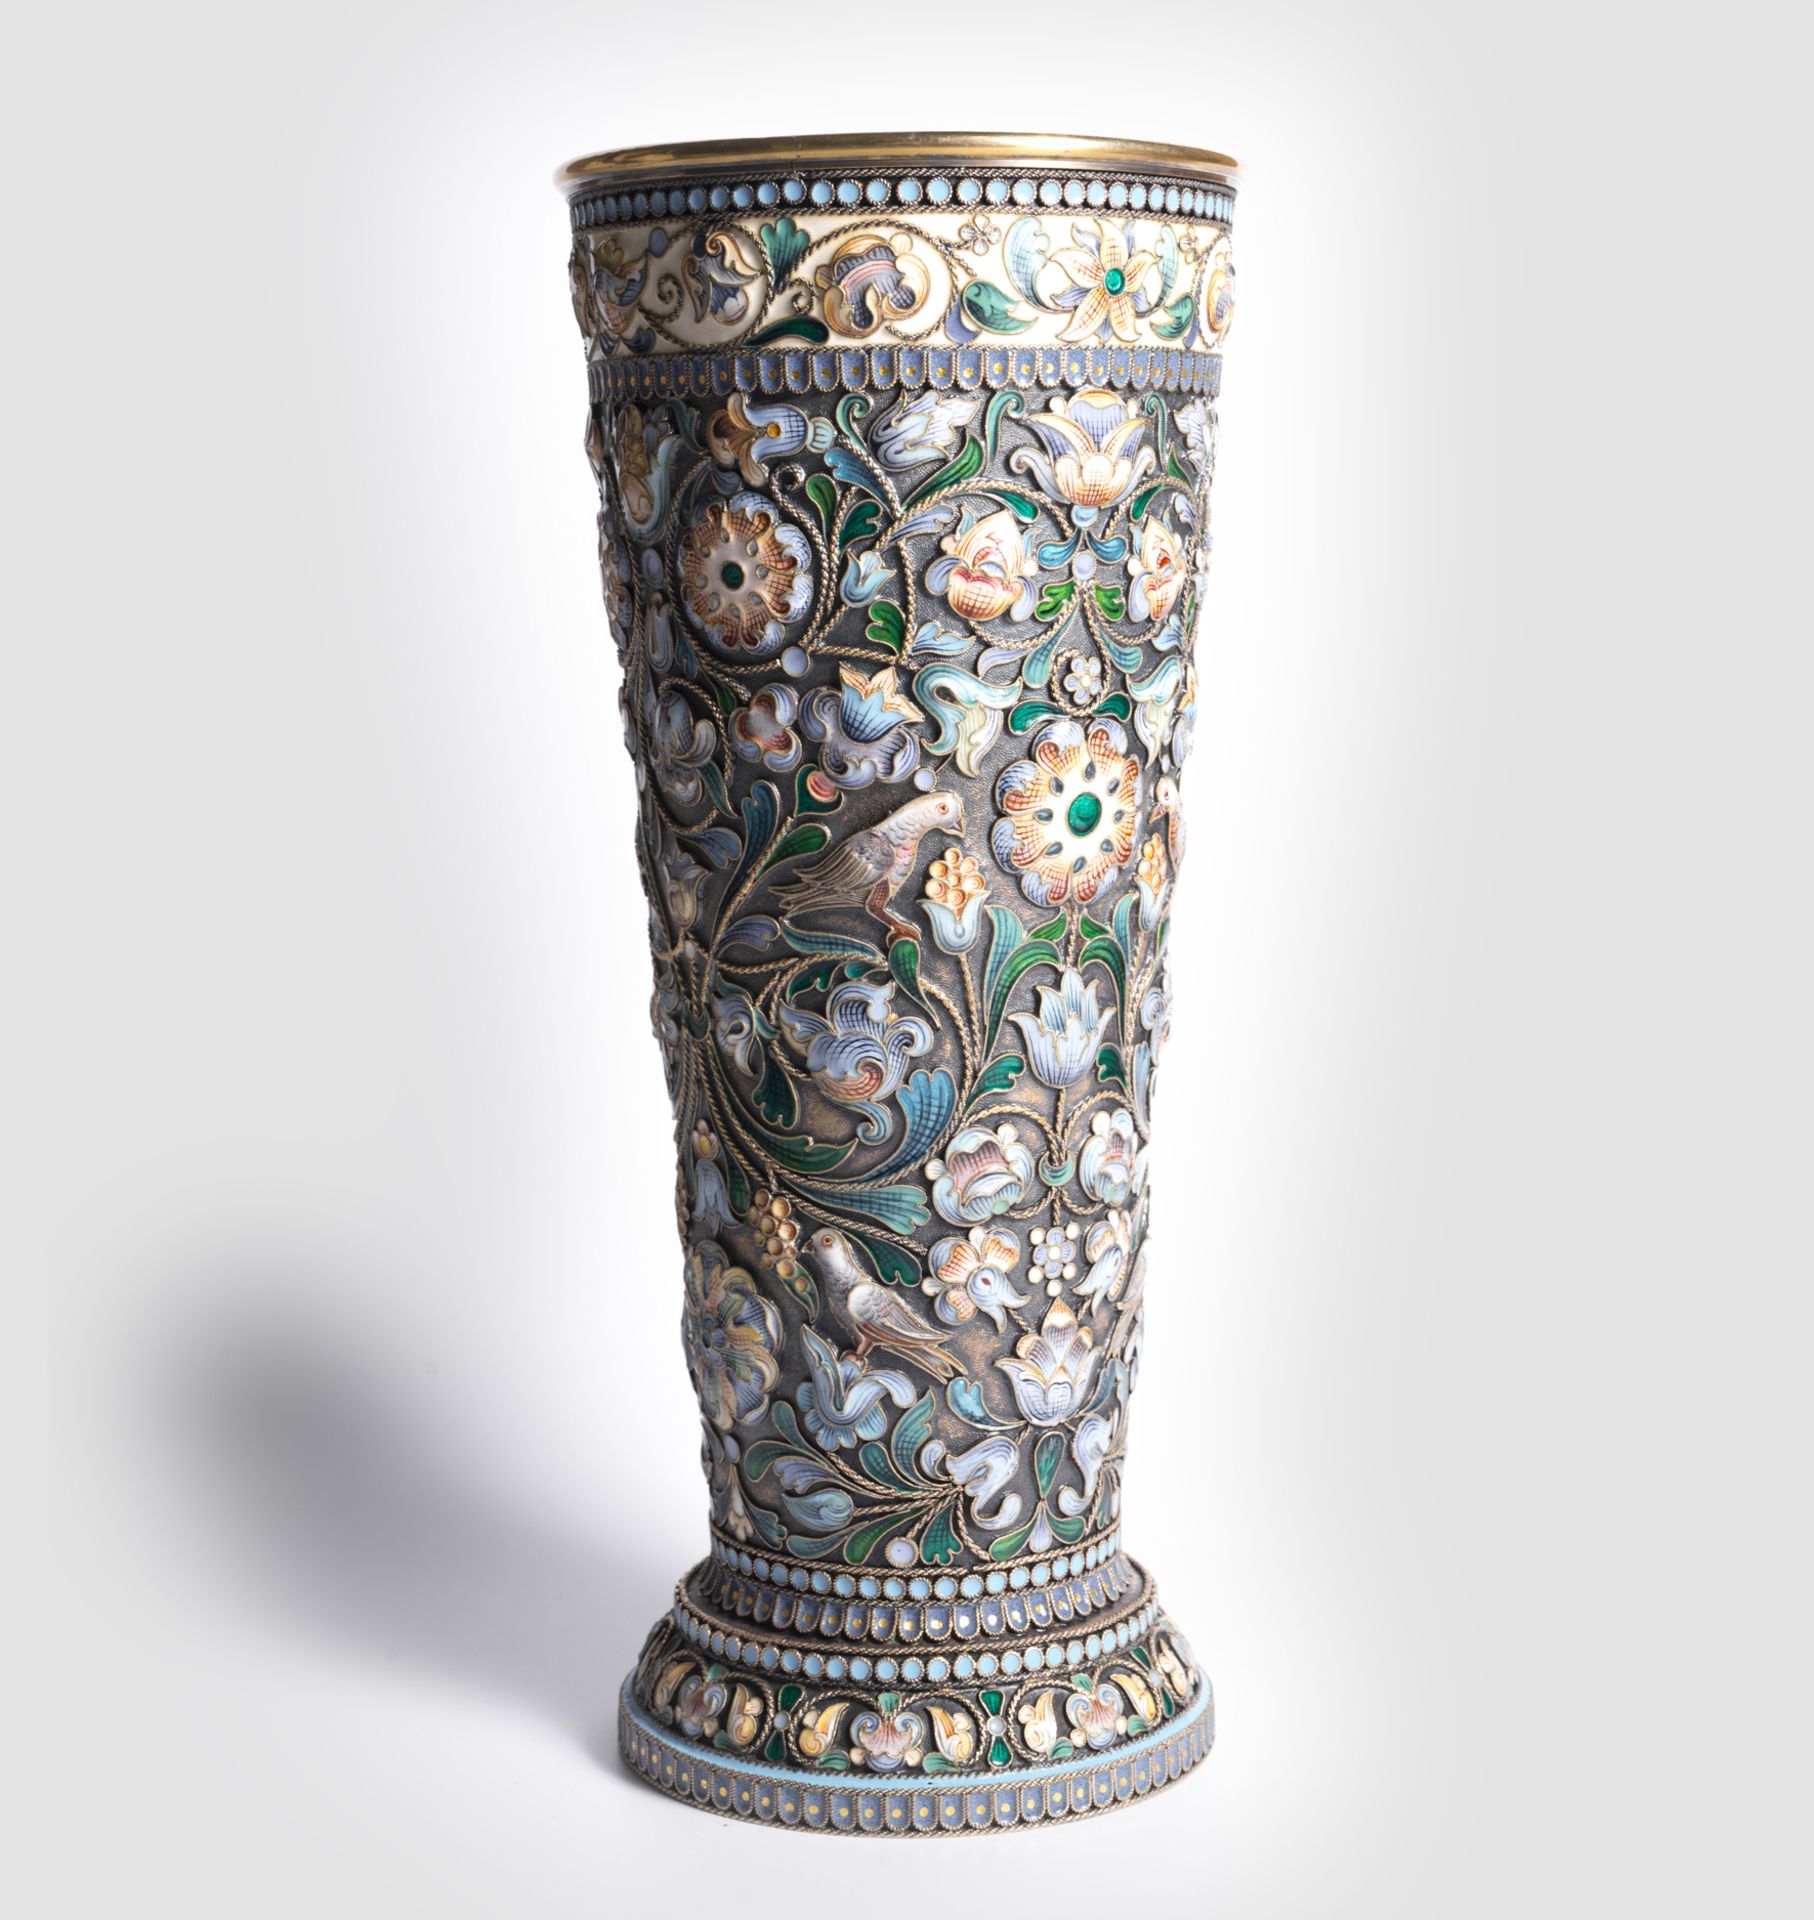 Gift to Tsar Nicholas II, made by Pavel Ovchinnikov, Highly important presentation beaker, Moscow 18